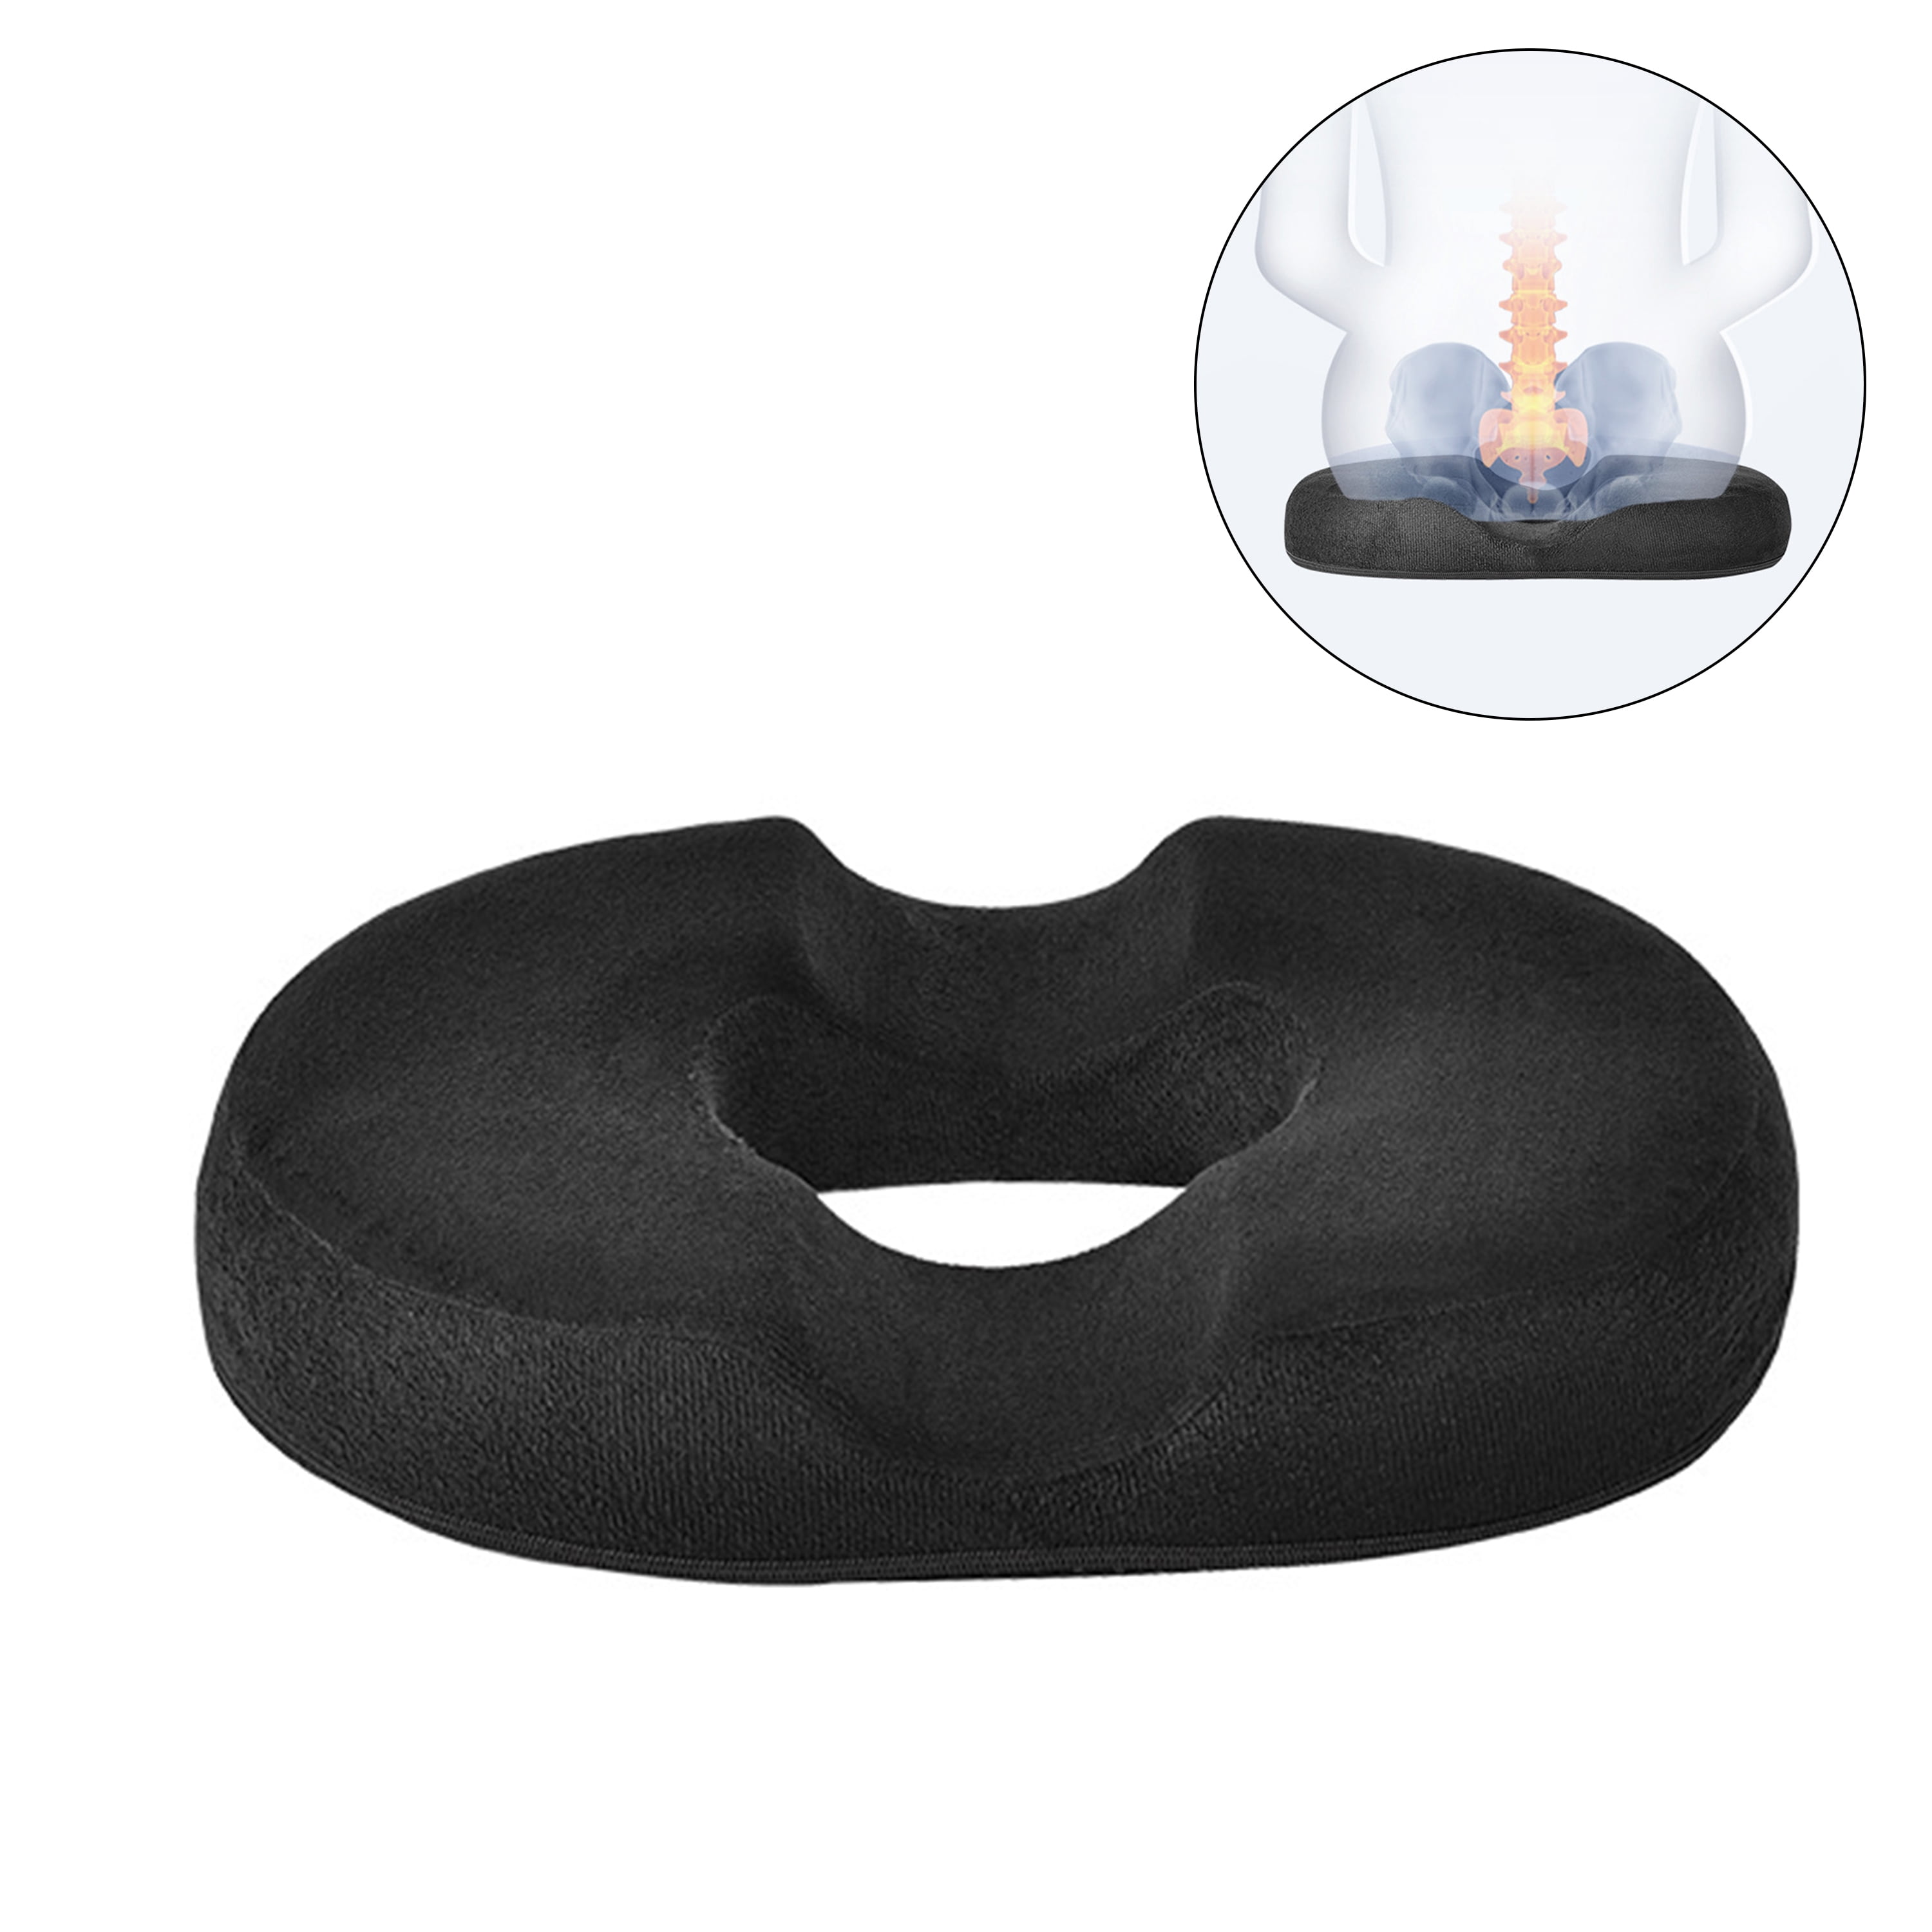 Fazista Donut Seat Cushion Home Office, Chair Pad, Car, Pain Relief for  Hemorrhoid/Piles Back / Lumbar Support - Buy Fazista Donut Seat Cushion  Home Office, Chair Pad, Car, Pain Relief for Hemorrhoid/Piles